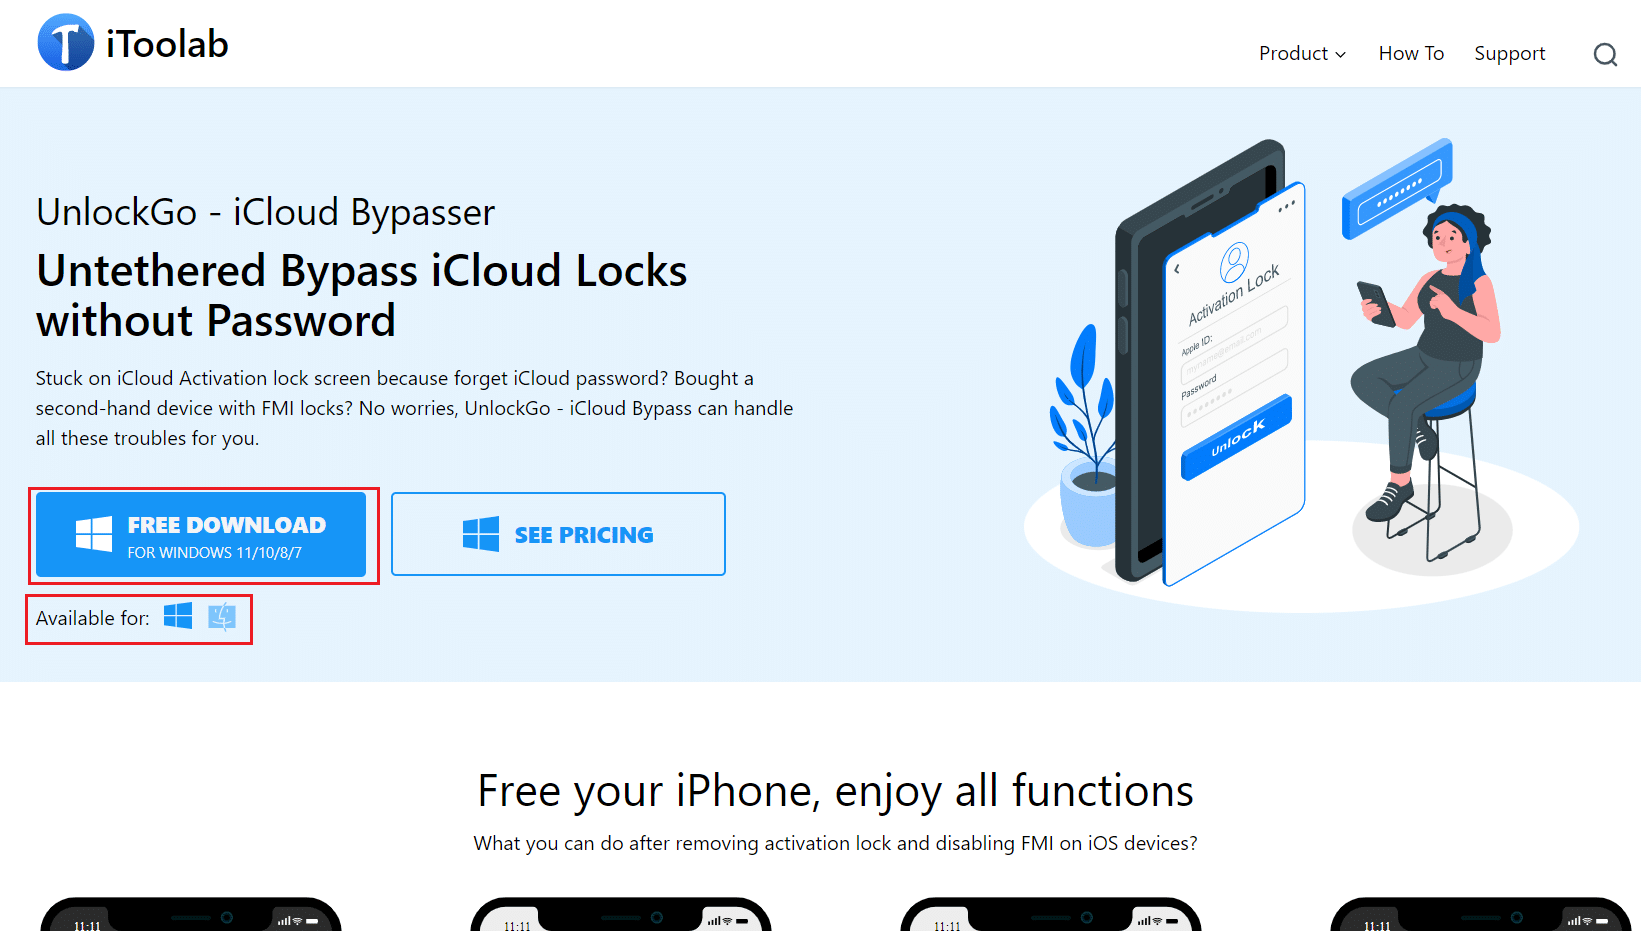 iTooLab UnlockGo iCloud Bypasser app download official website. How to Turn Off Find My iPhone Without Password